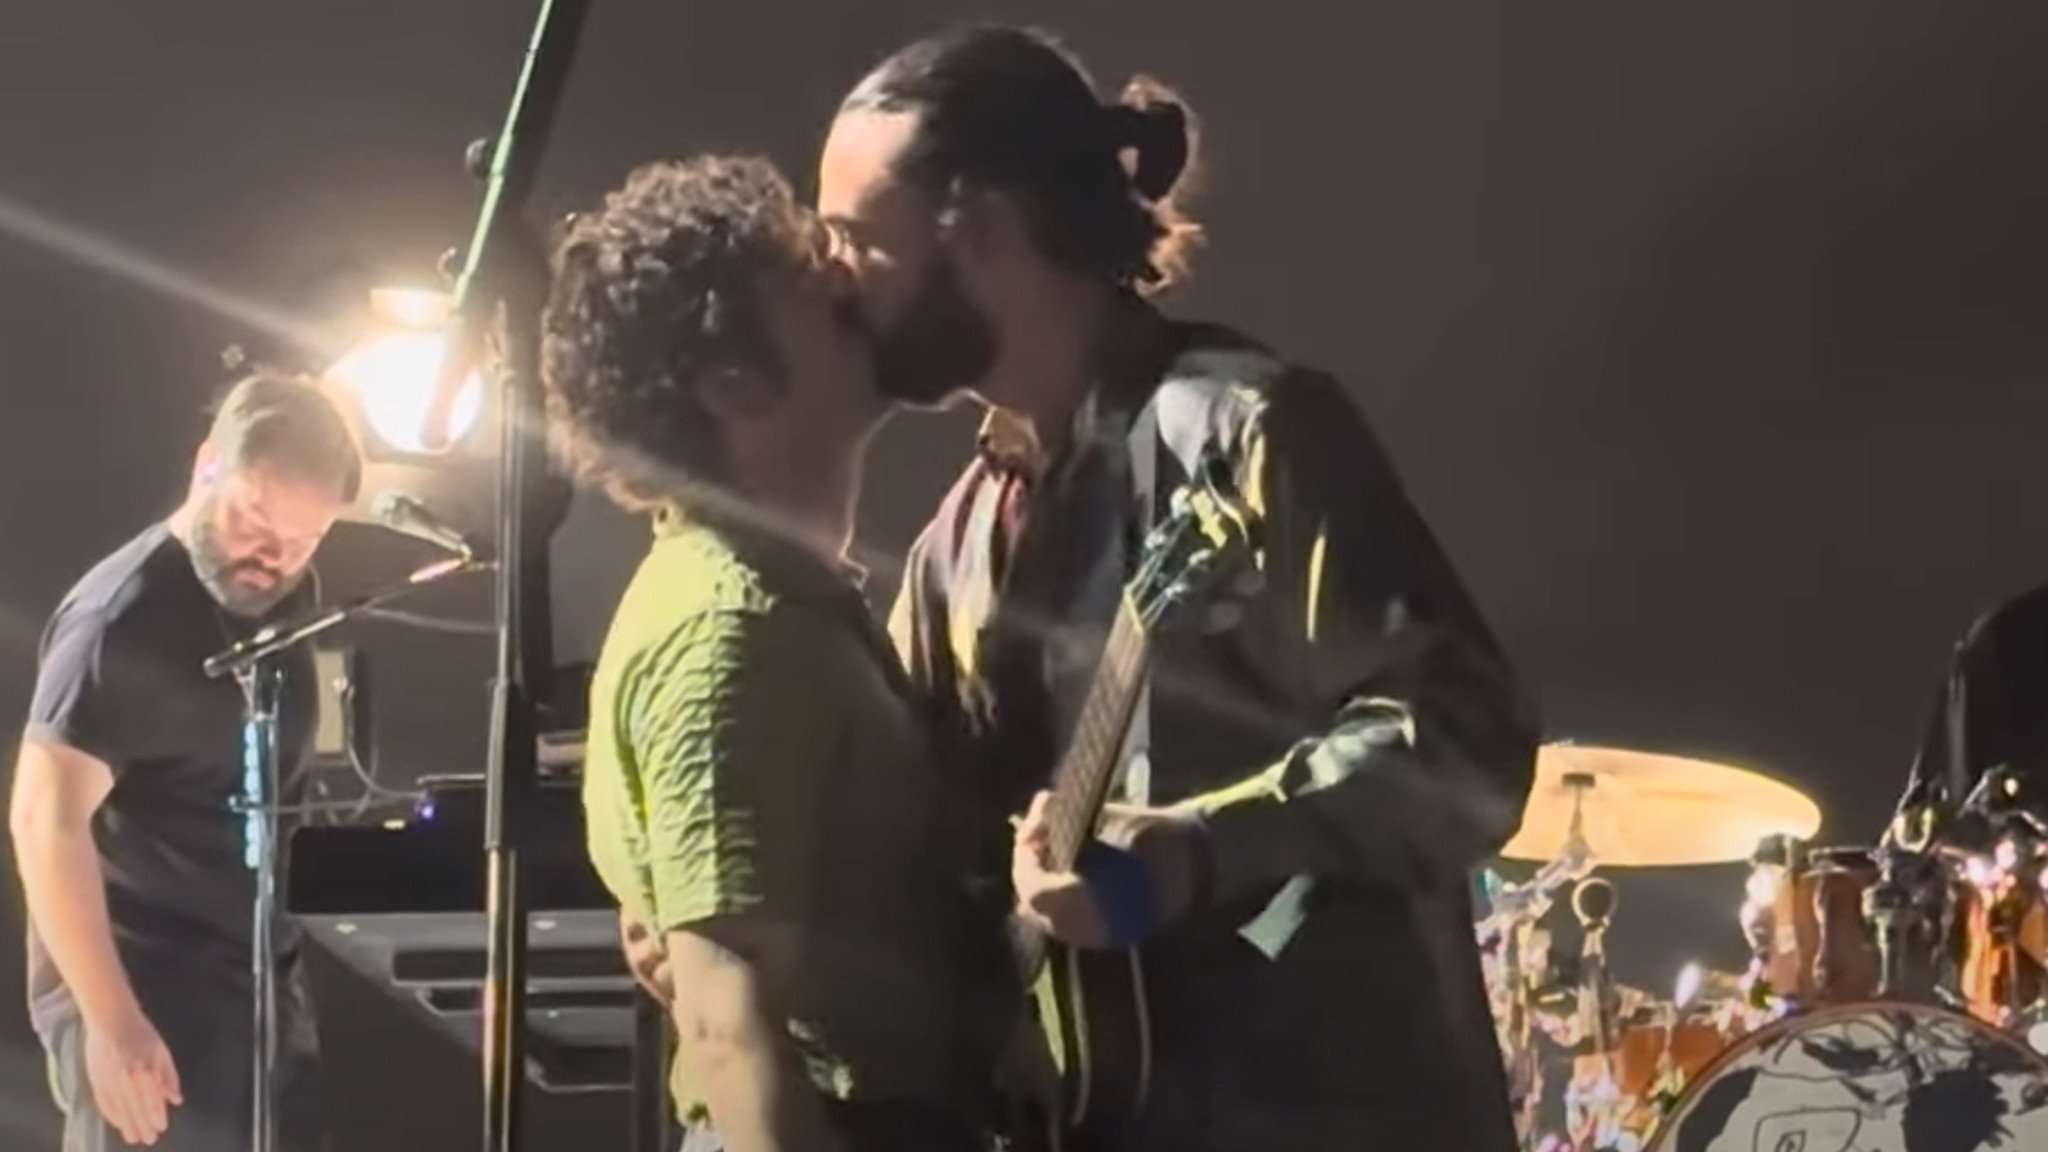 The 1975 singer Matty Healy kisses bandmate Ross MacDonald during a concert in Kuala Lumpur, Malaysia, in July 2023. The singer’s onstage LGBTQ-related rant raises questions about tourists visiting less tolerant countries than their own.